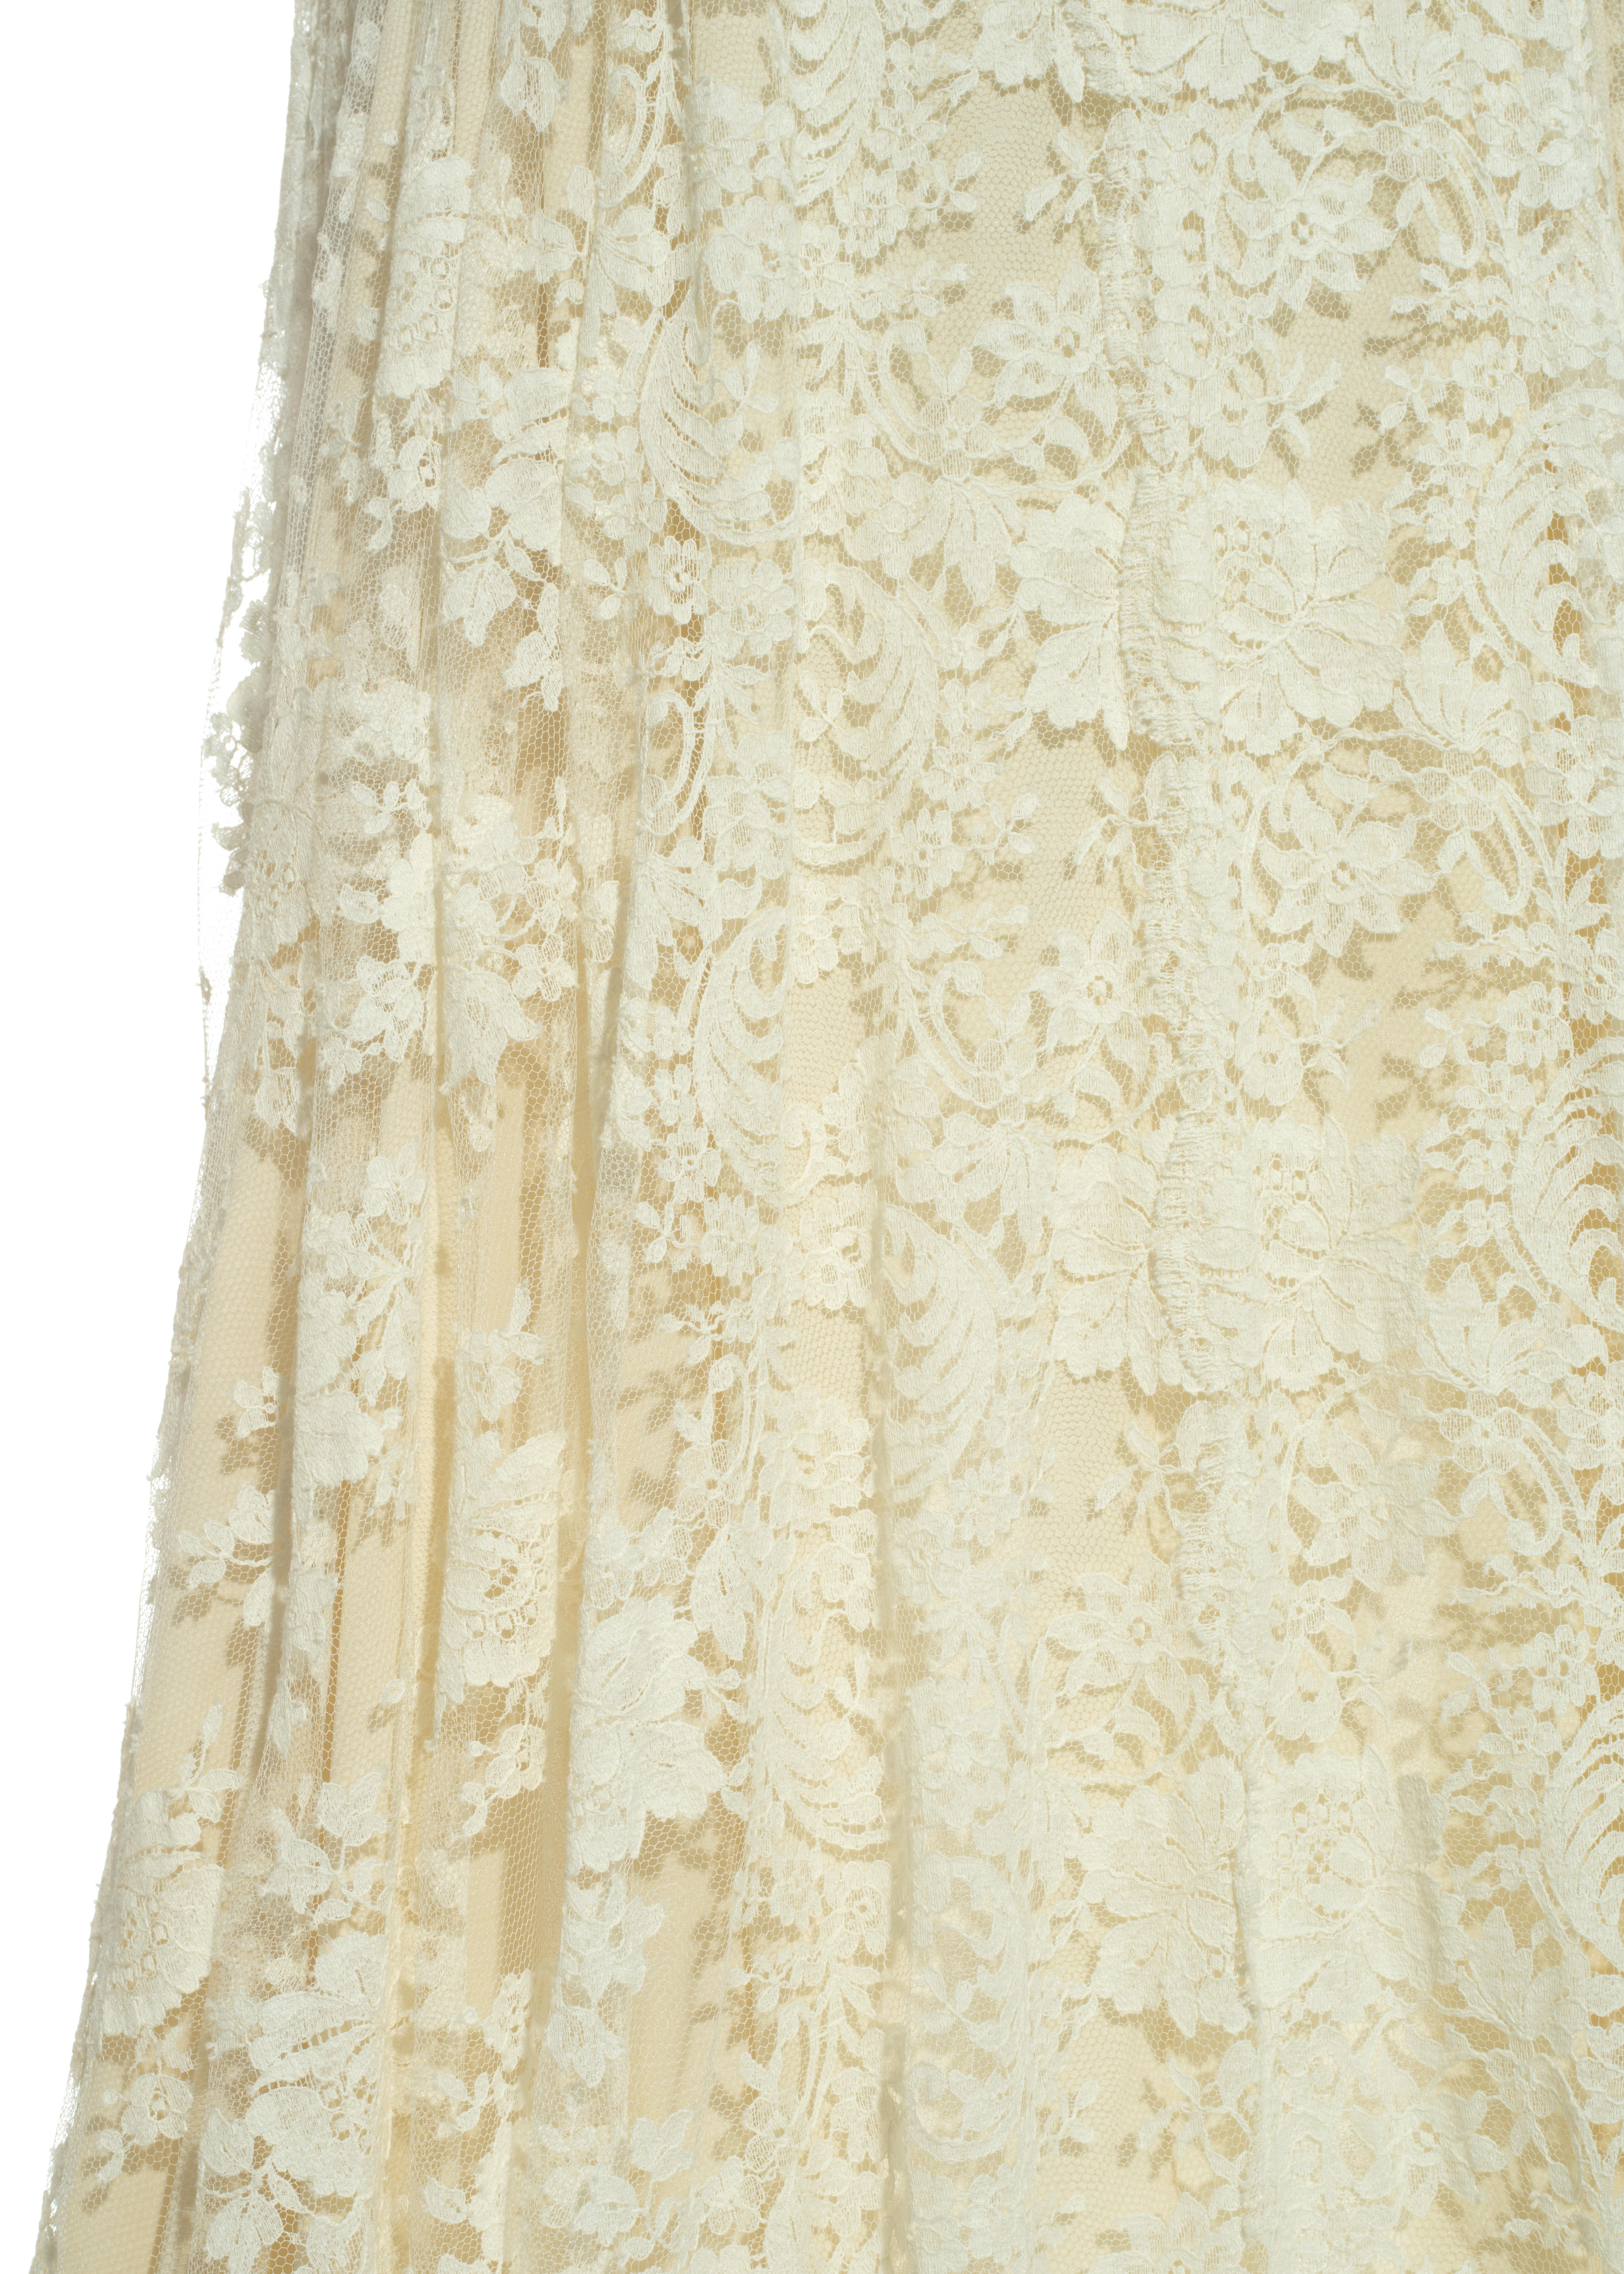 Women's Alexander McQueen ivory lace corseted trained evening dress, 'Sarabande' ss 2007